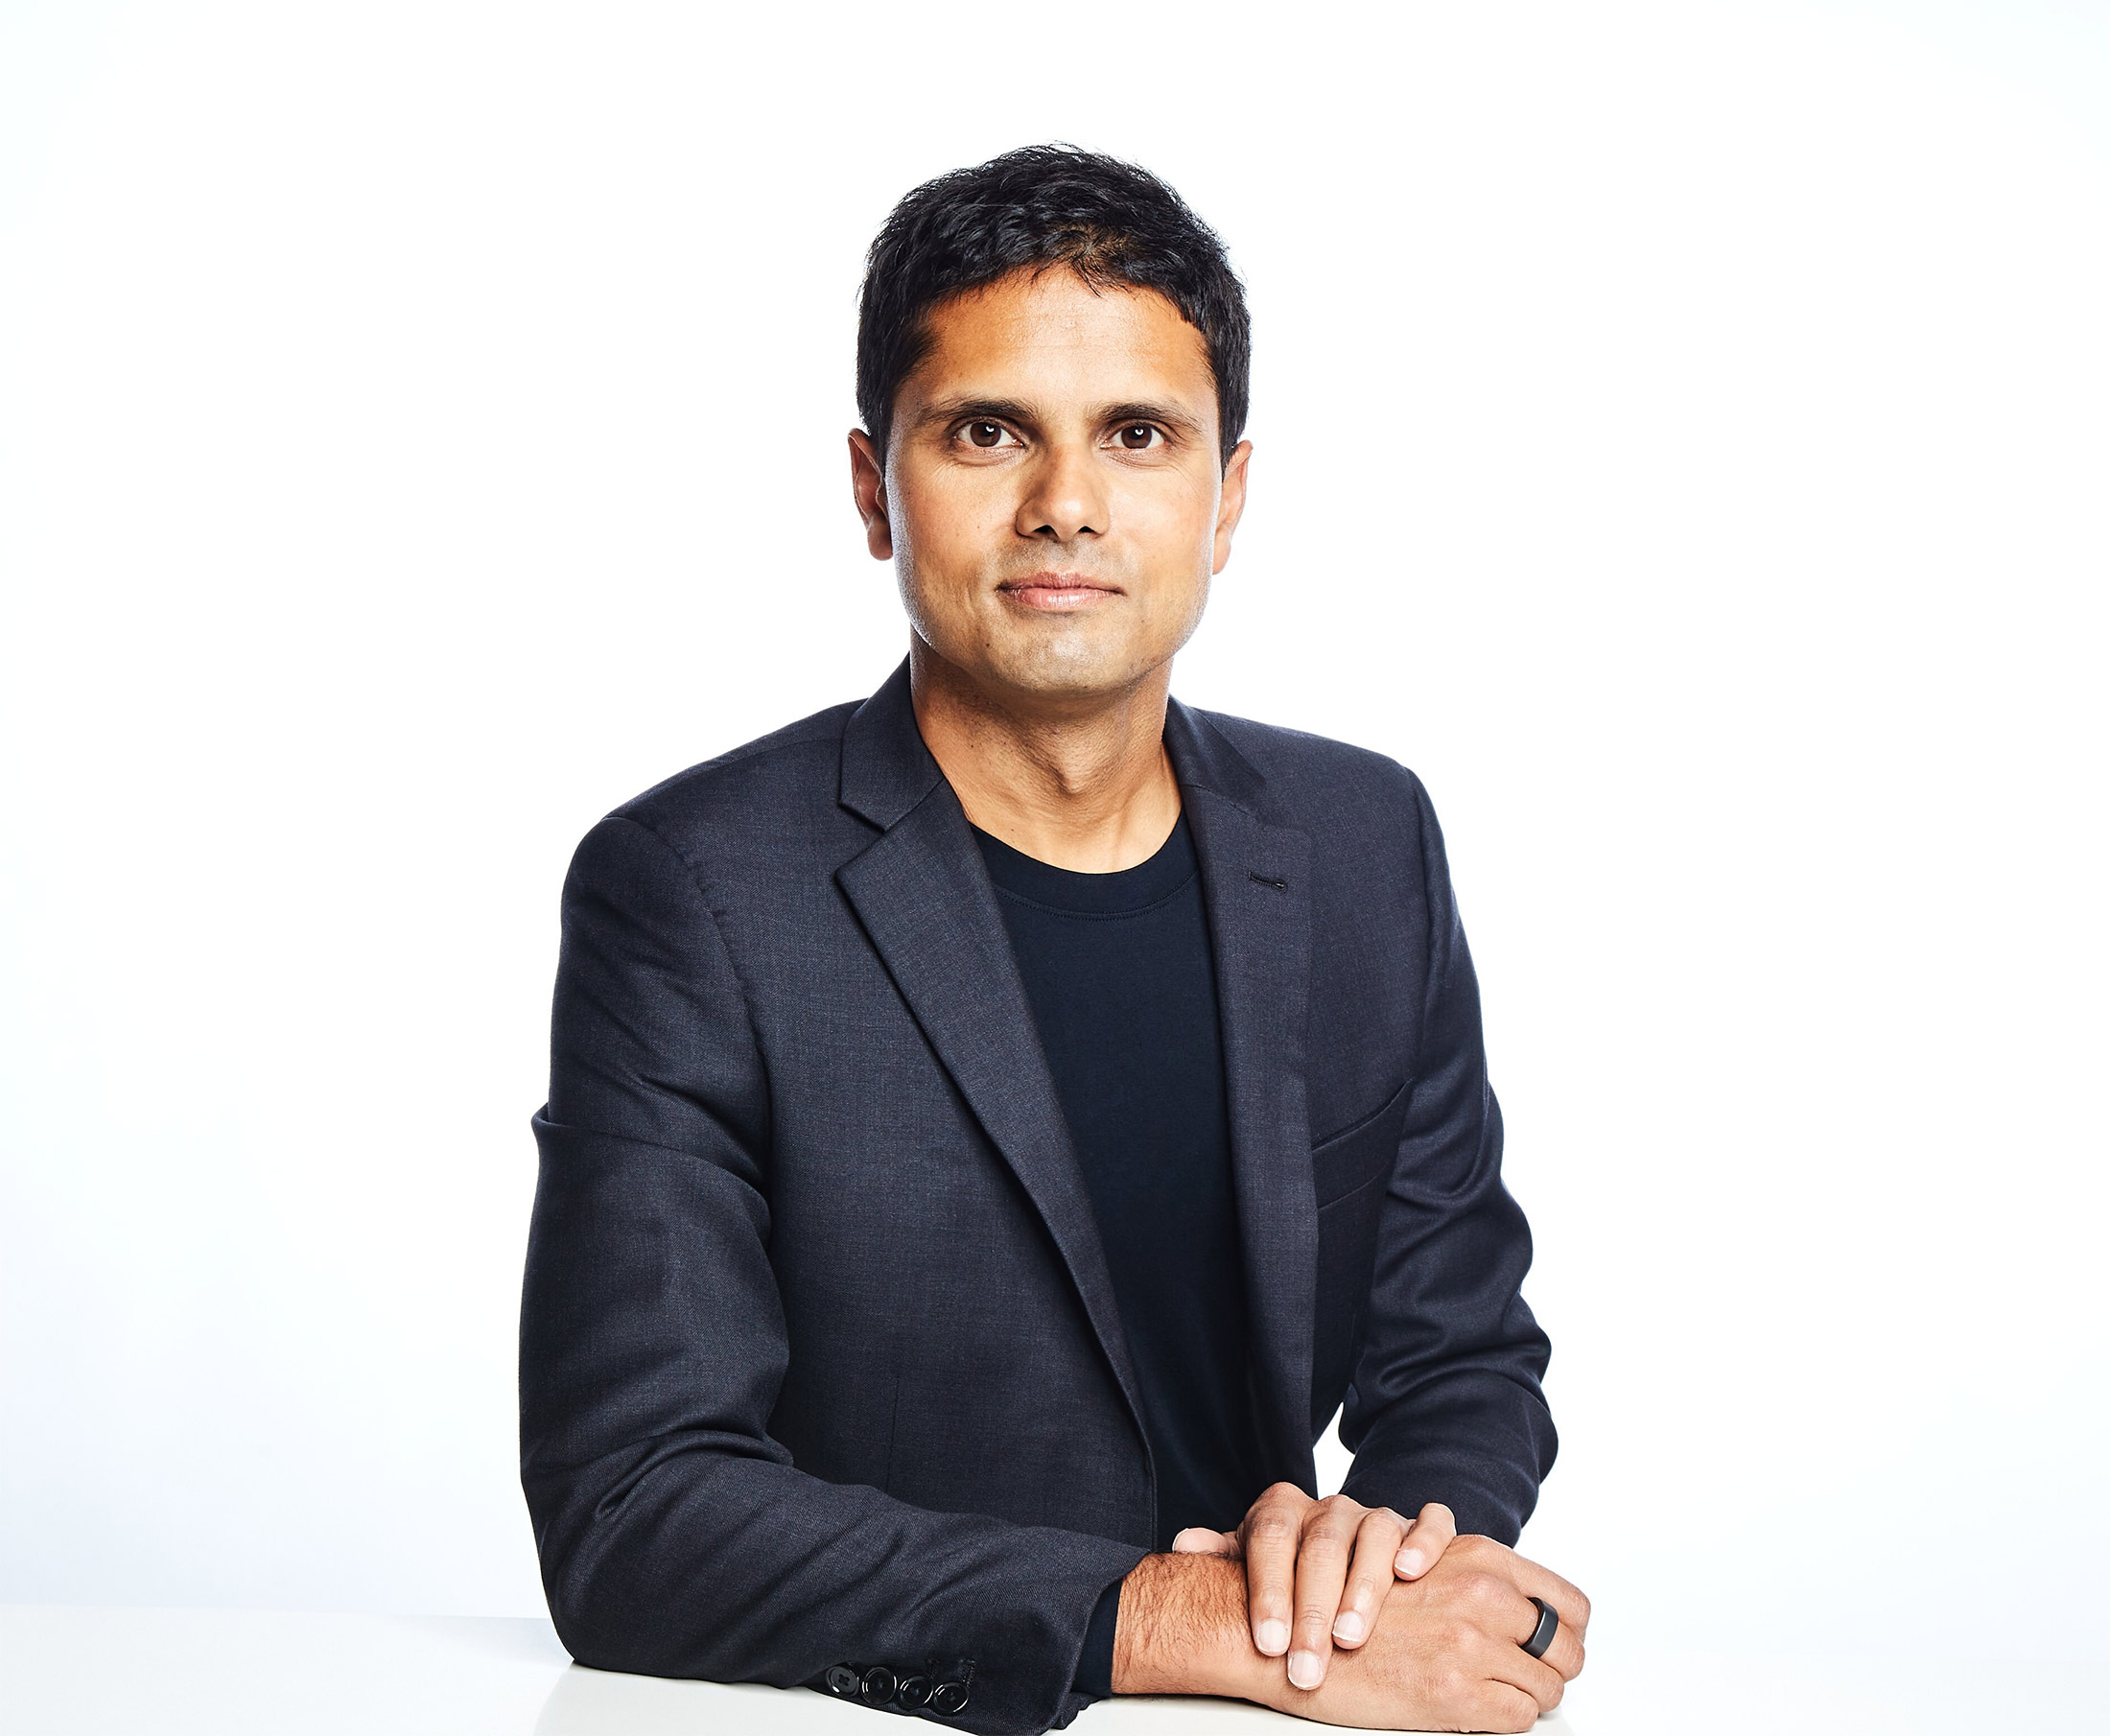 Bhavin Shah, co-founder and CEO of Moveworks